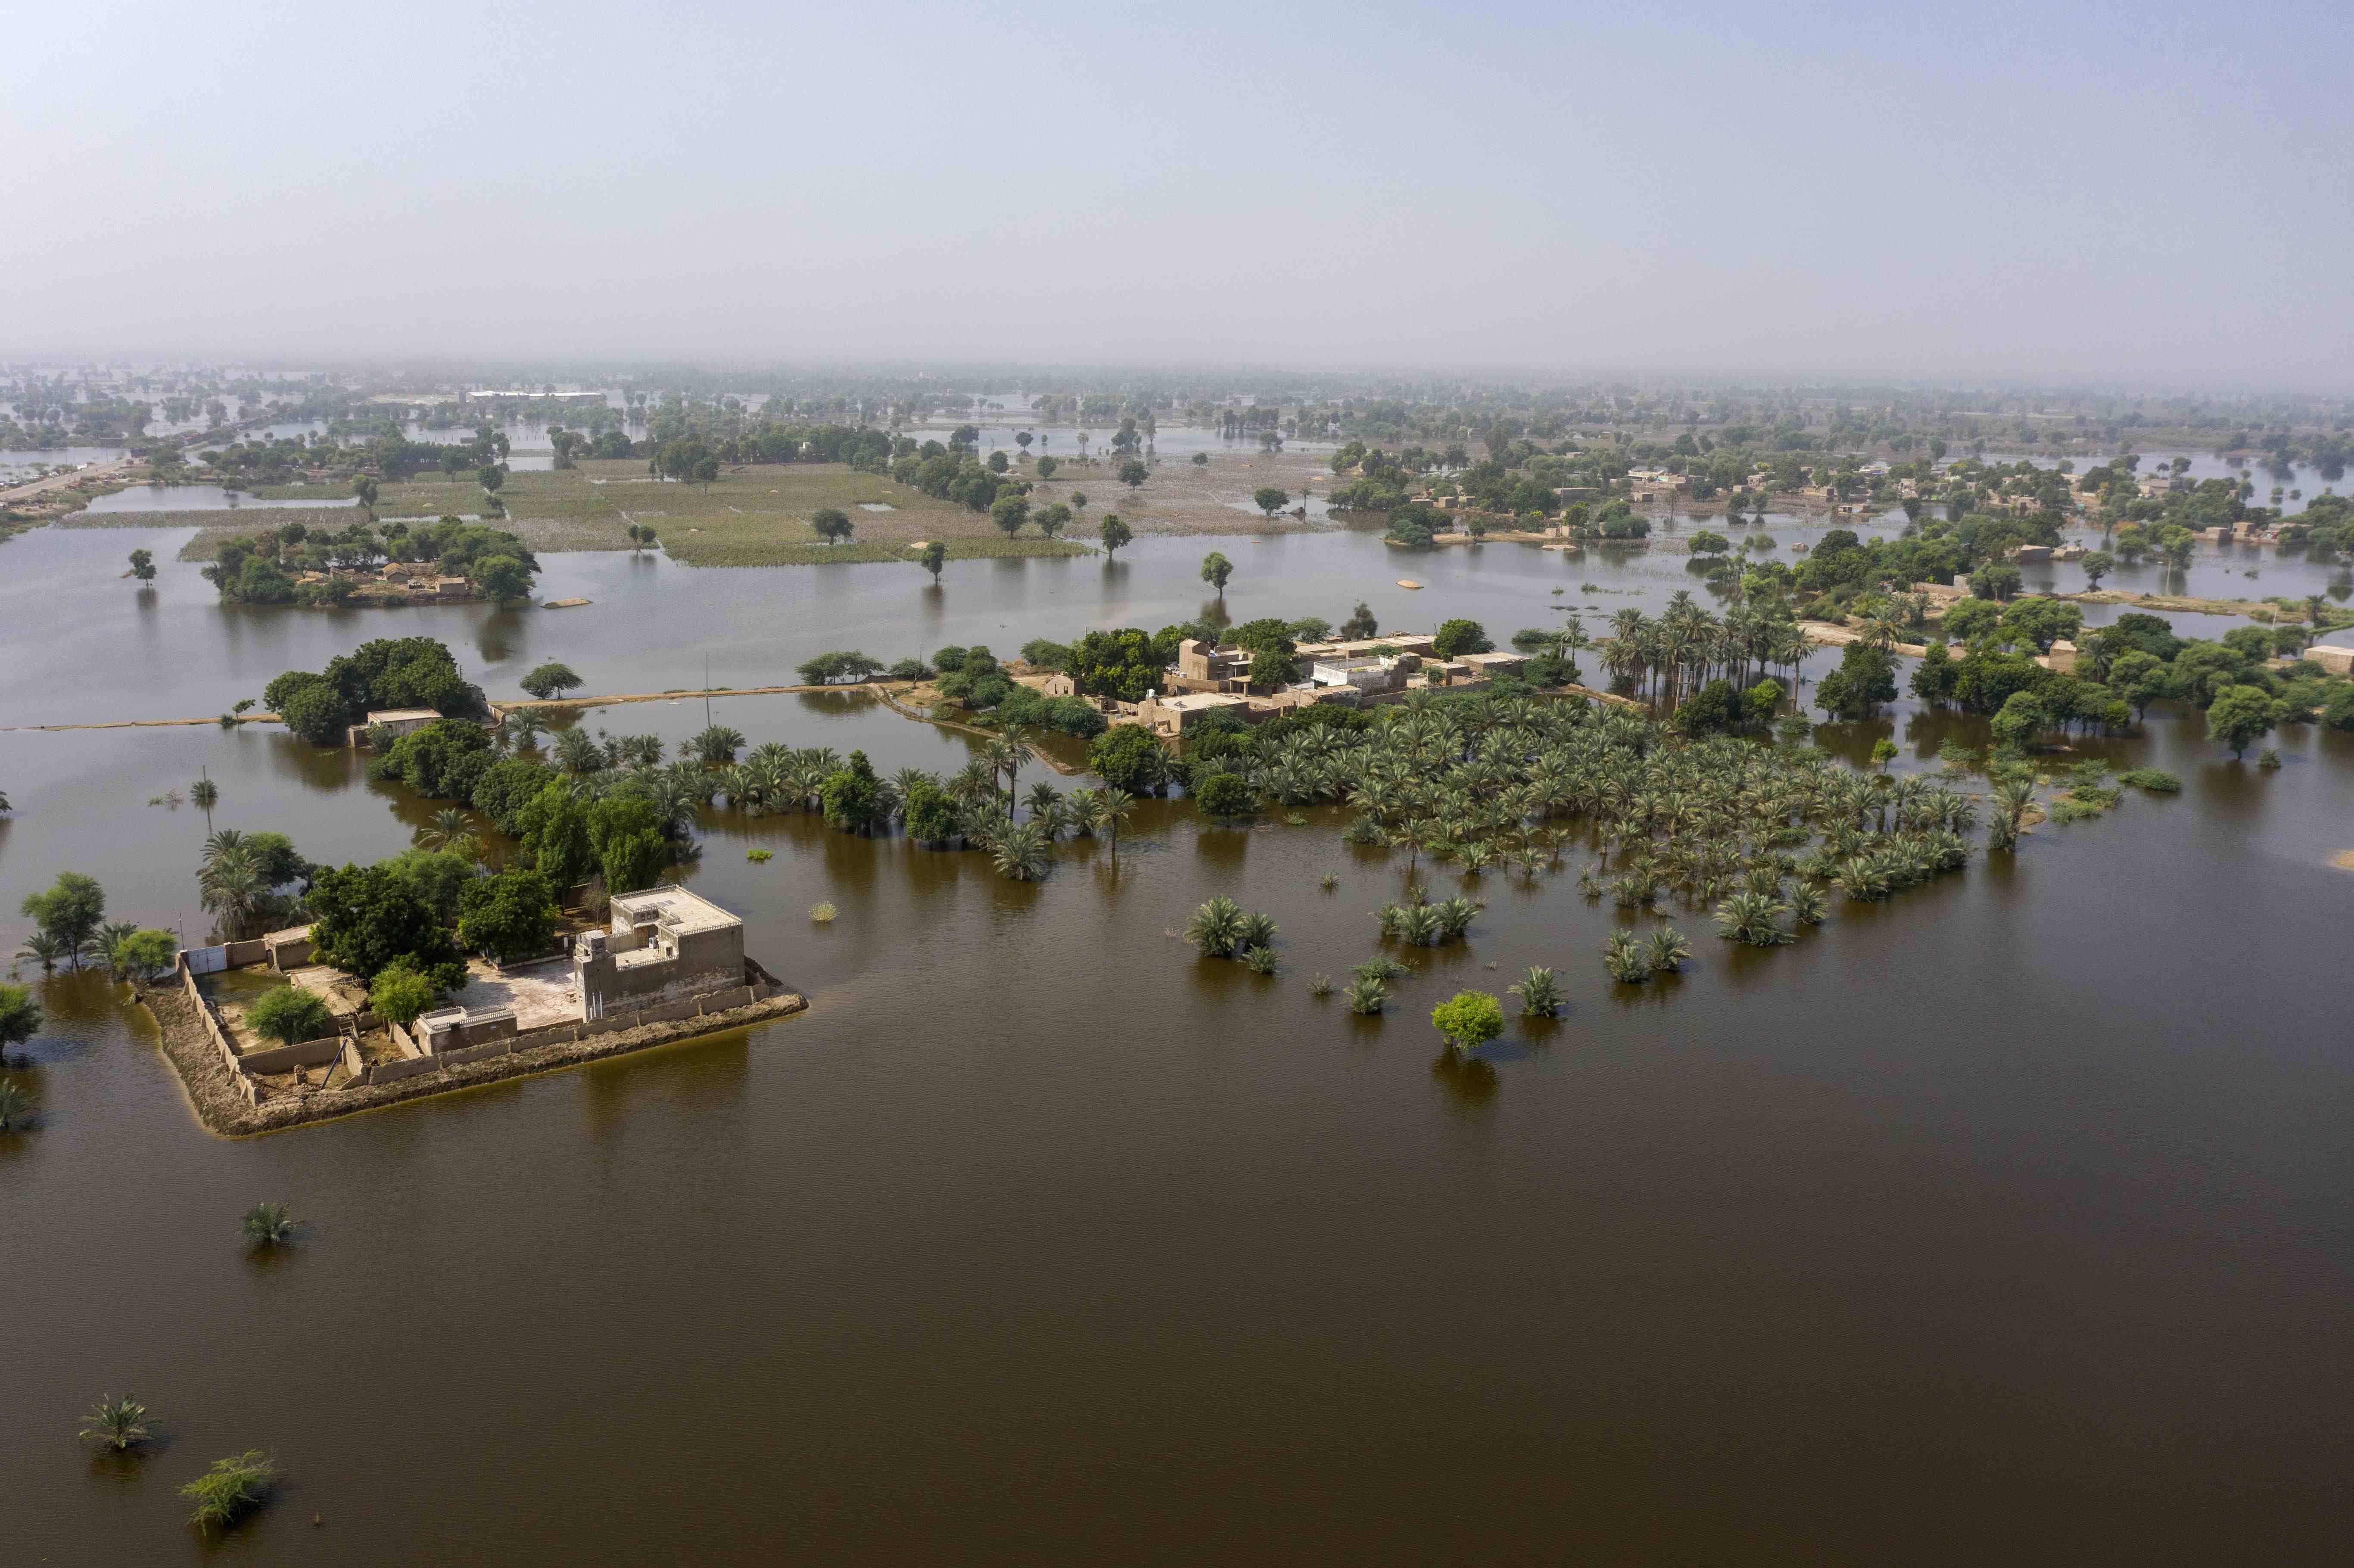 On 12 September 2022, an aerial view of flood-affected Din Xux Malah village in Khairpur district, Sindh Province, Pakistan.Ongoing torrential monsoon rains and the subsequent floods have washed away villages and infrastructure in all four provinces of Pakistan, killing more than 1,000 people, a third of them children, since June 2022. The government of Pakistan says at least 33 million people have been affected by this climate disaster, which has plunged already vulnerable populations into further distress